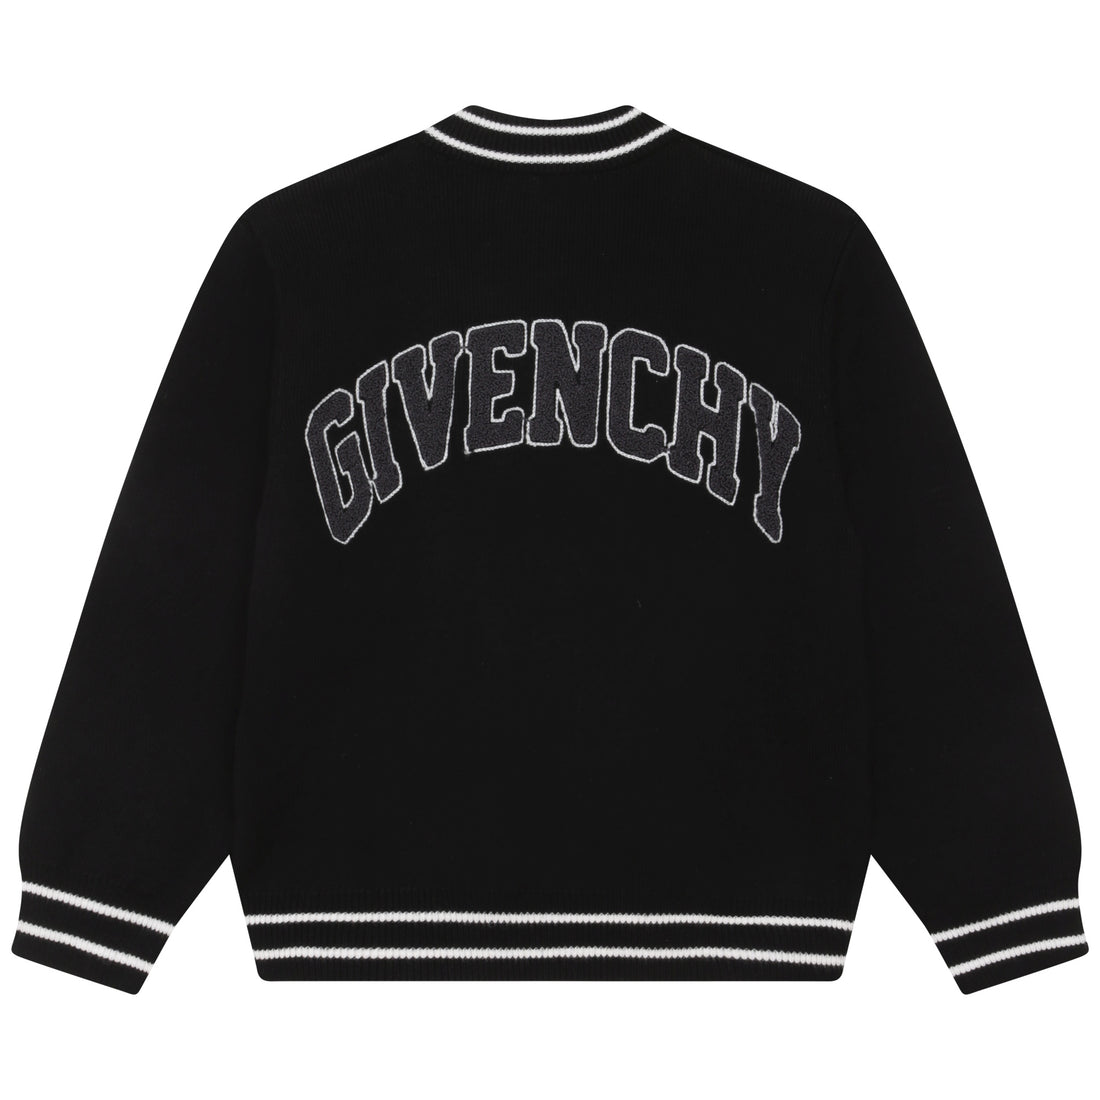 Givenchy Knitted Cardigan Style: H25492